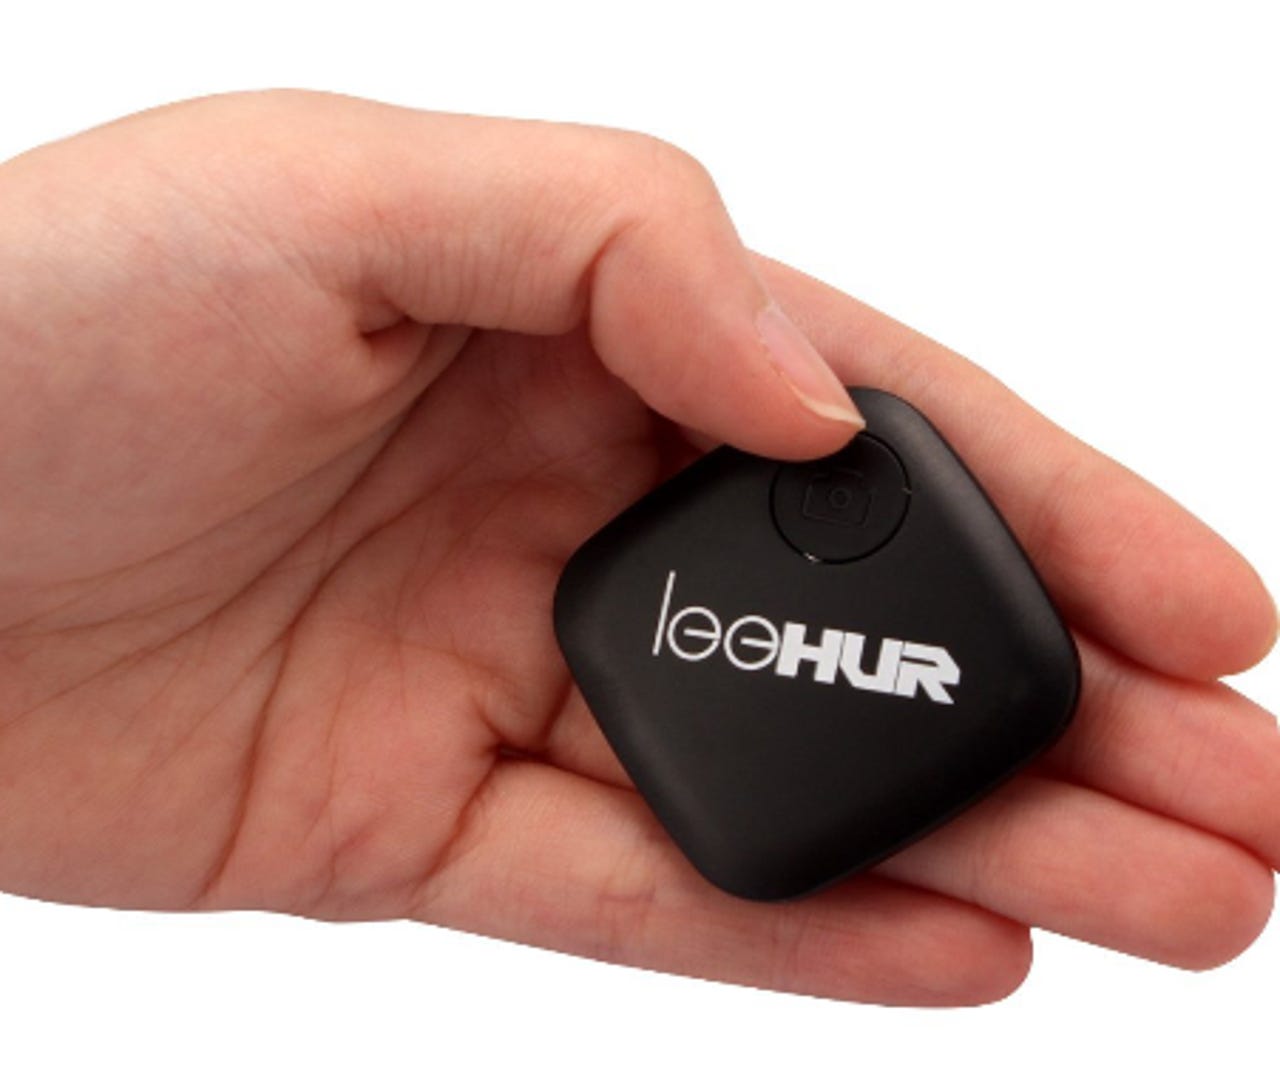 Smallest GPS and Bluetooth trackers and finders ZDNet